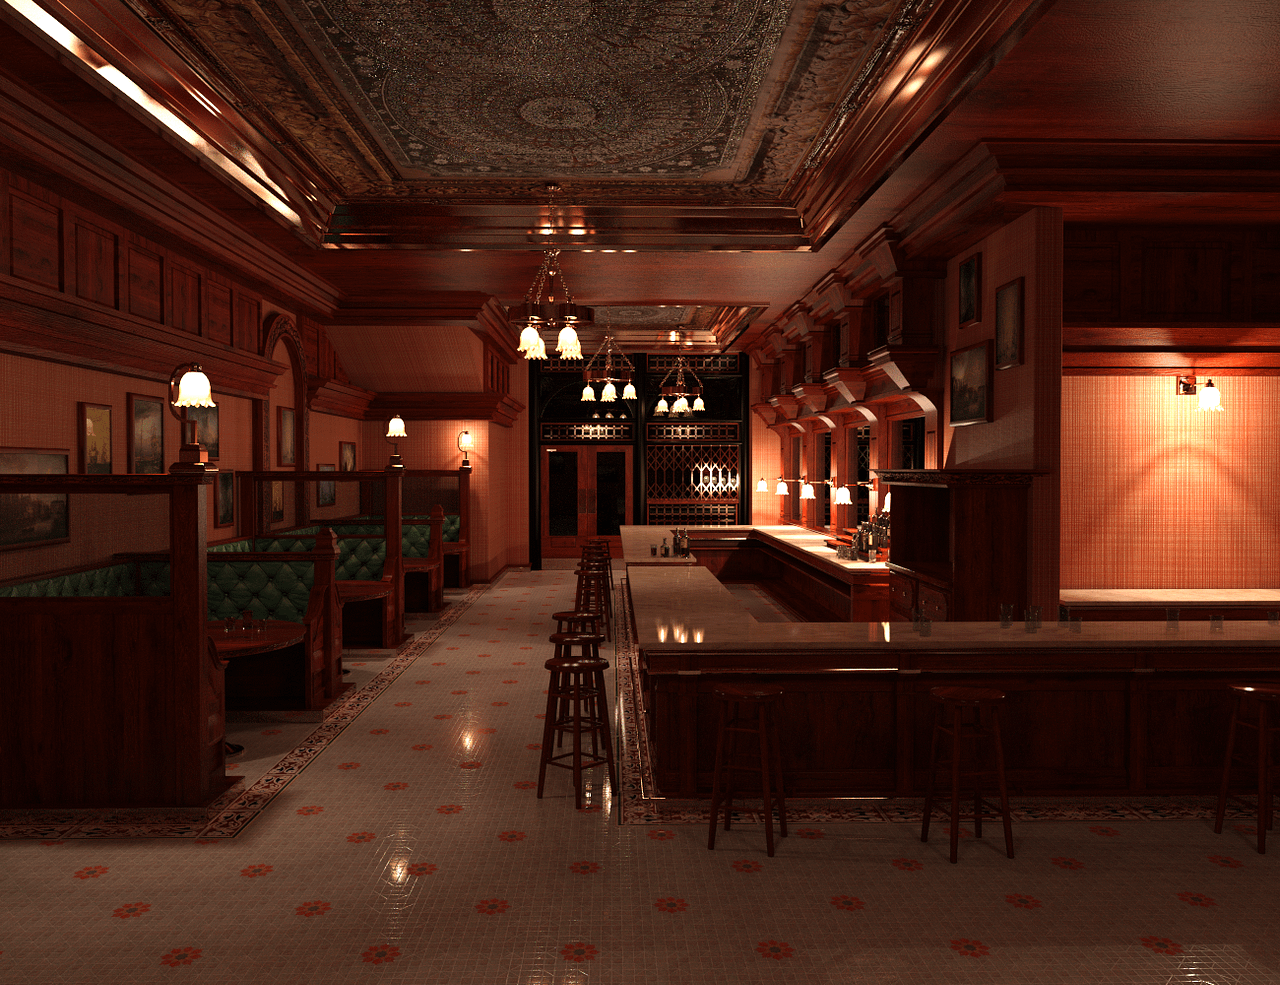 Rendering of a quality bar 3d model at night